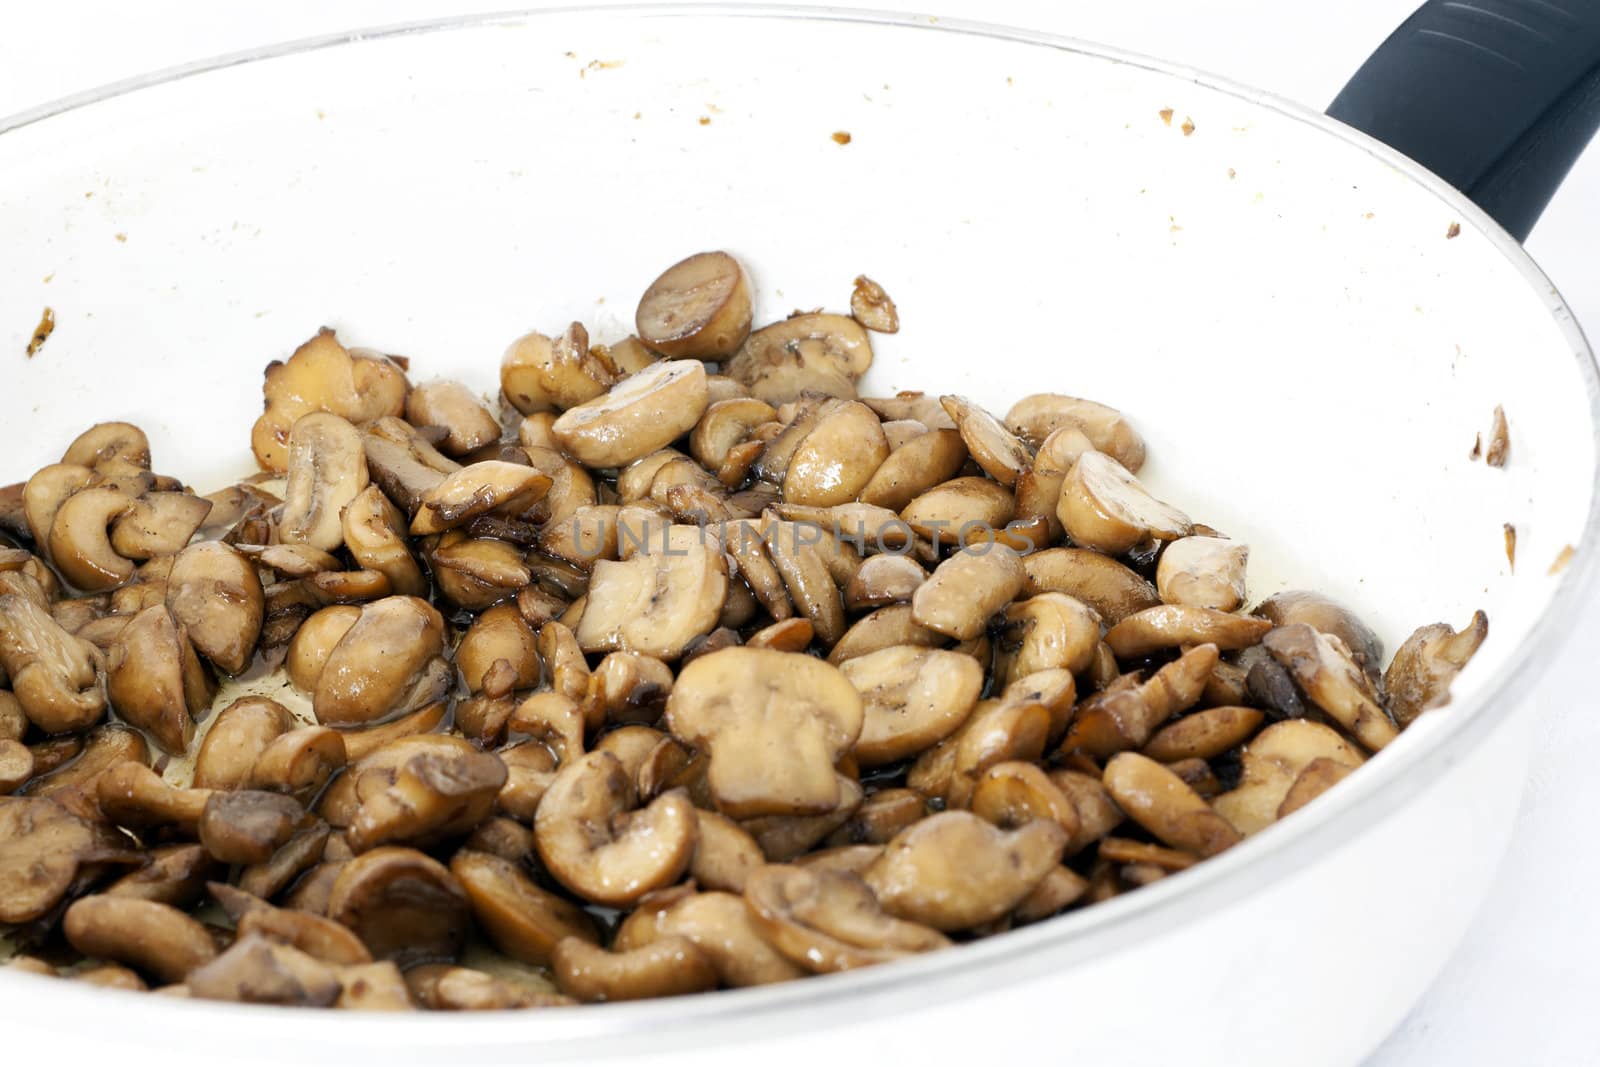 Fried mushrooms in pan by magraphics